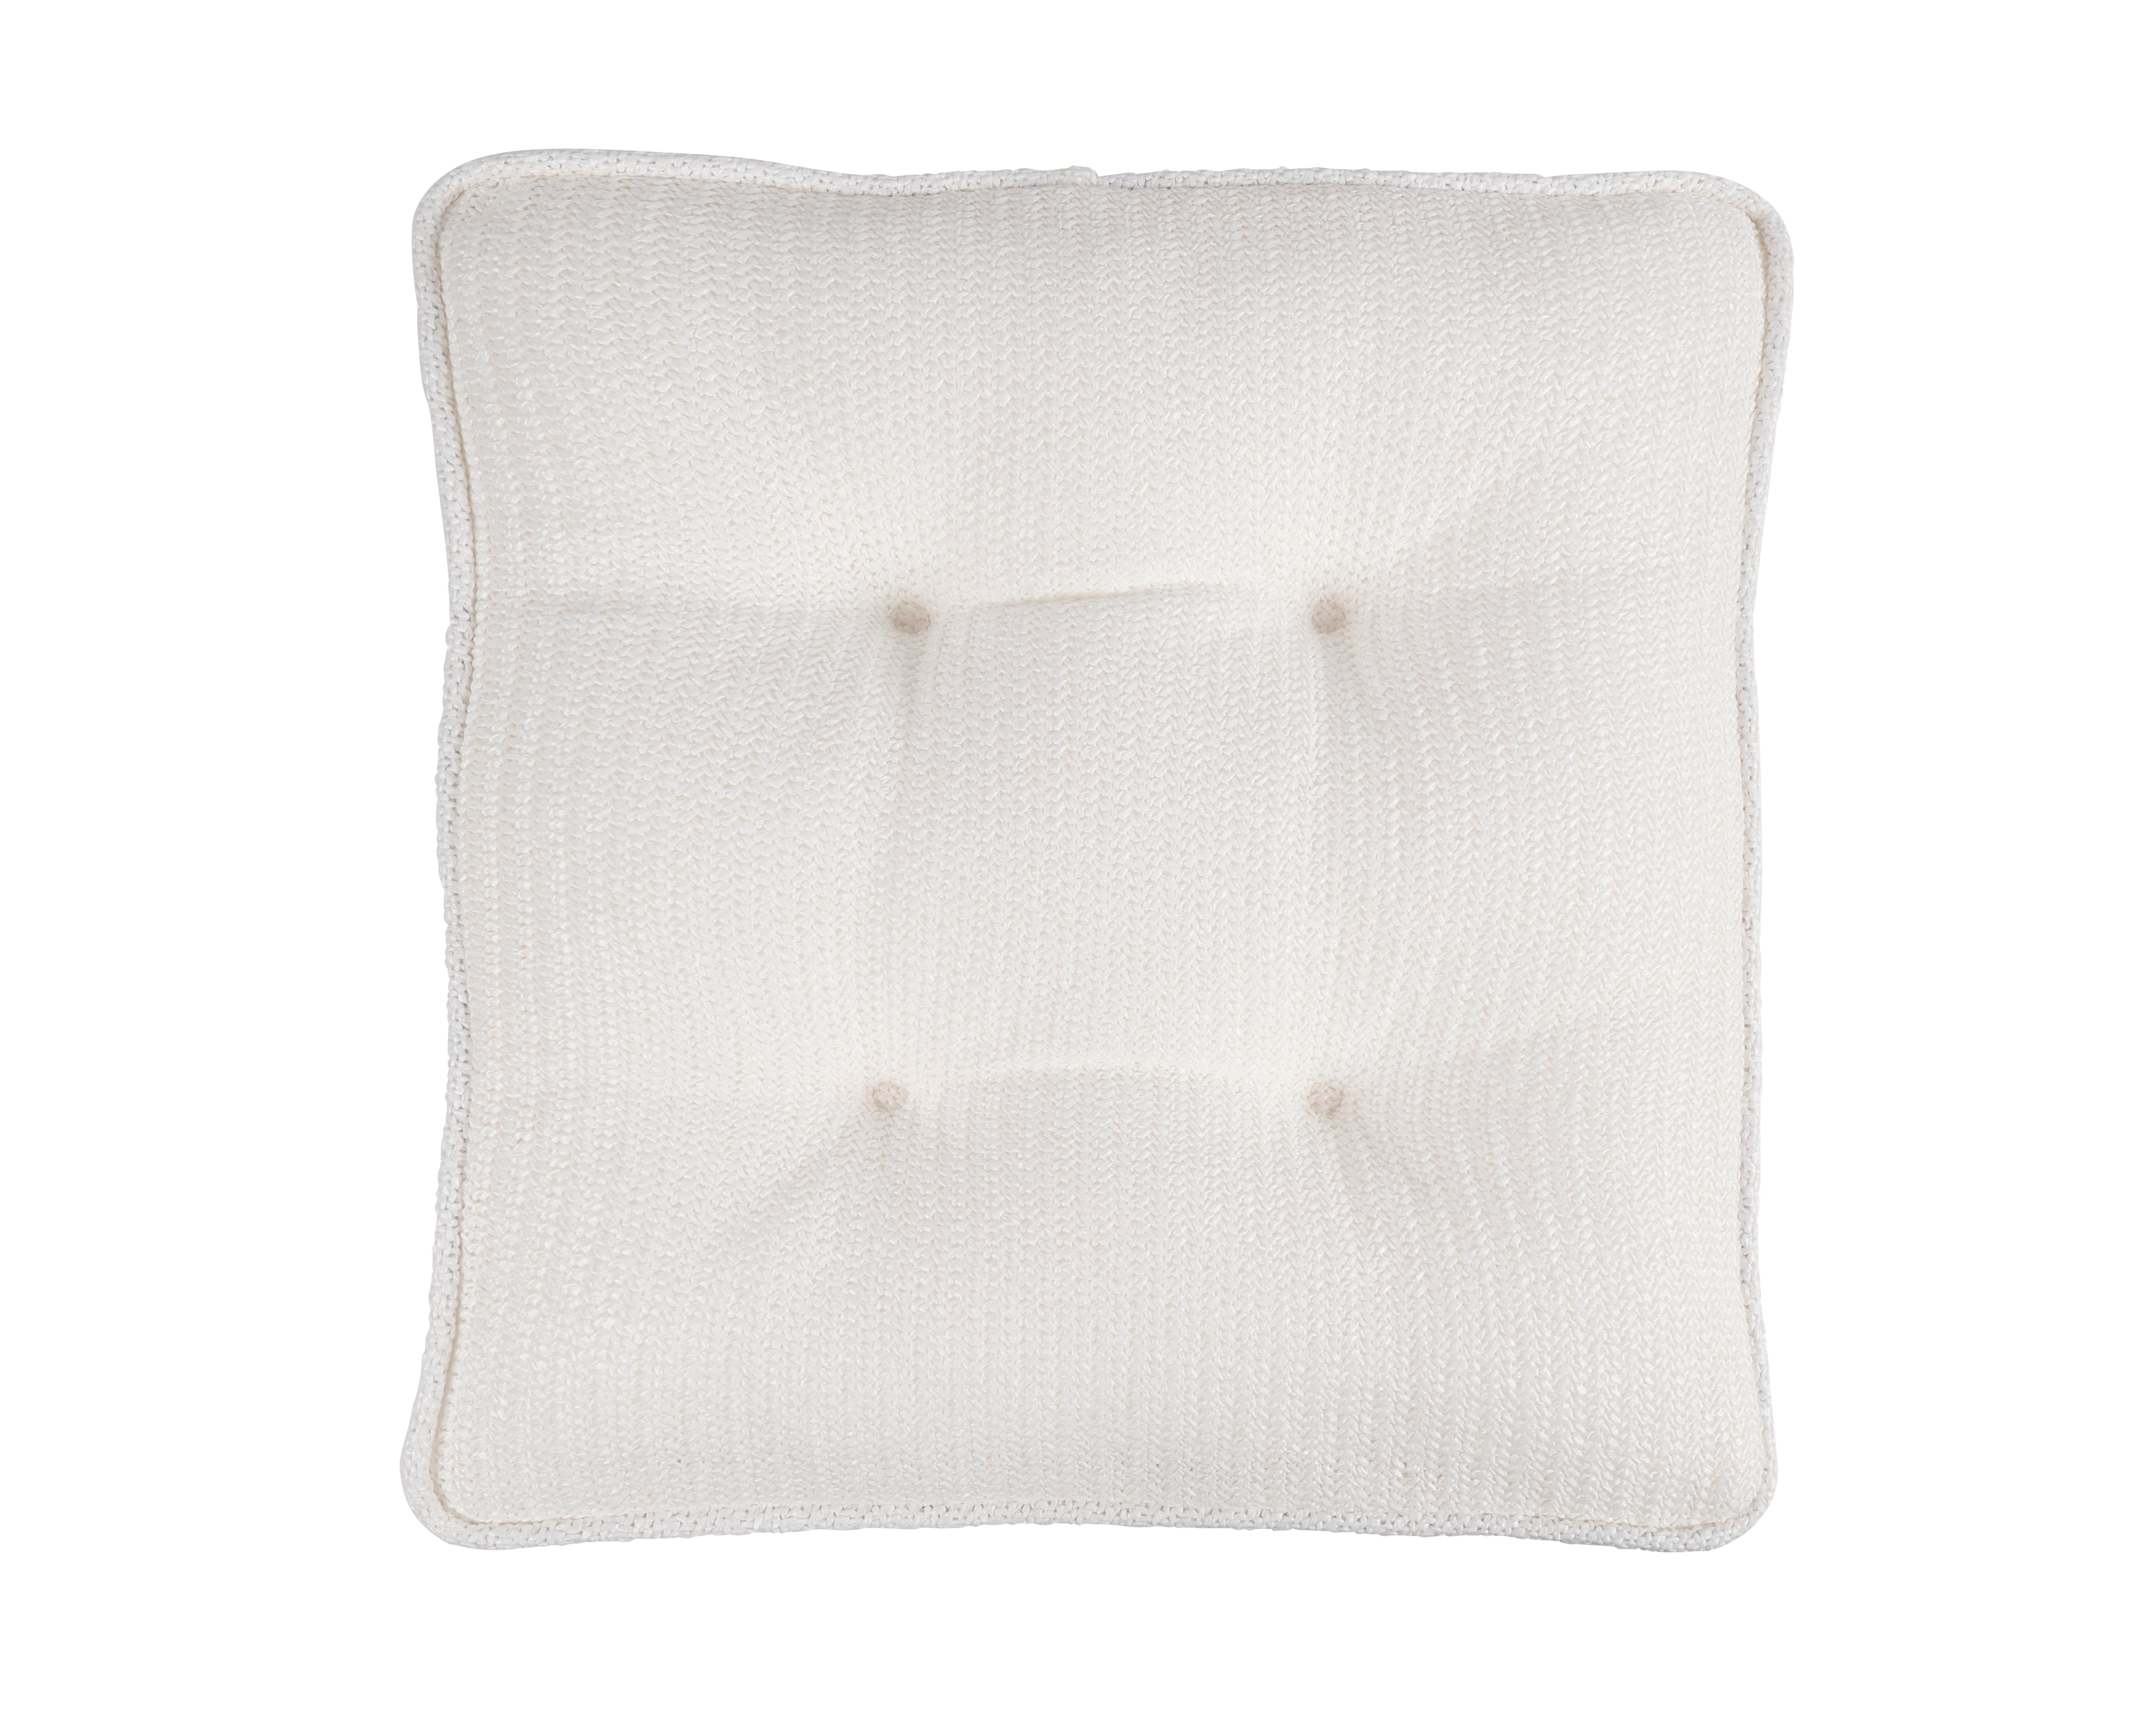 BROOKE OUTDOOR SEAT BUTTON CUSHION WHITE